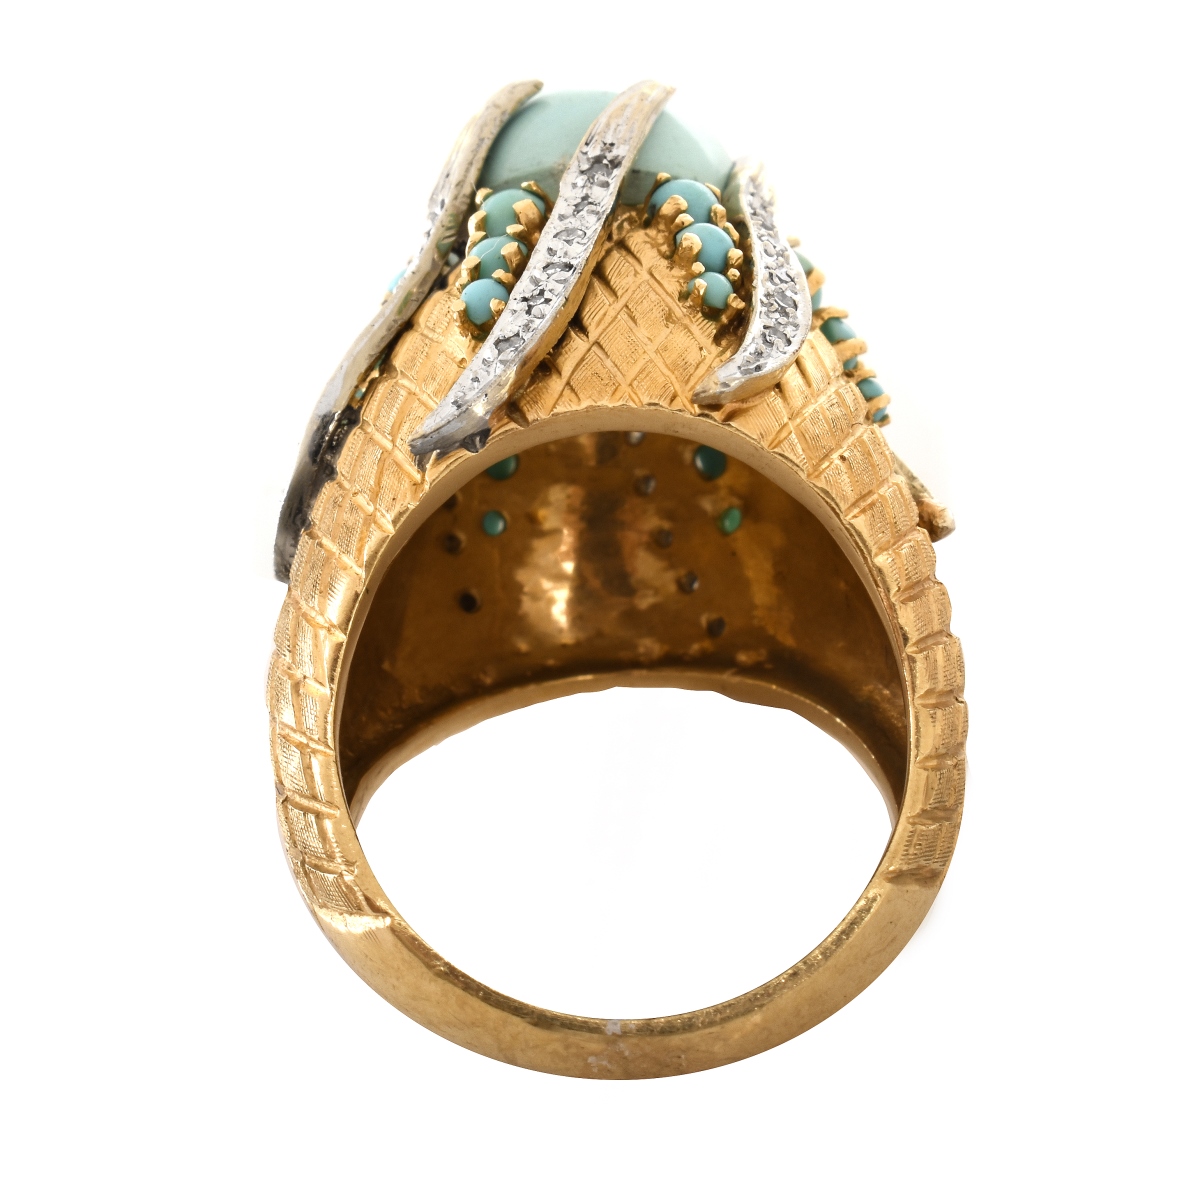 Vintage Turquoise, Diamond and 14K Ring